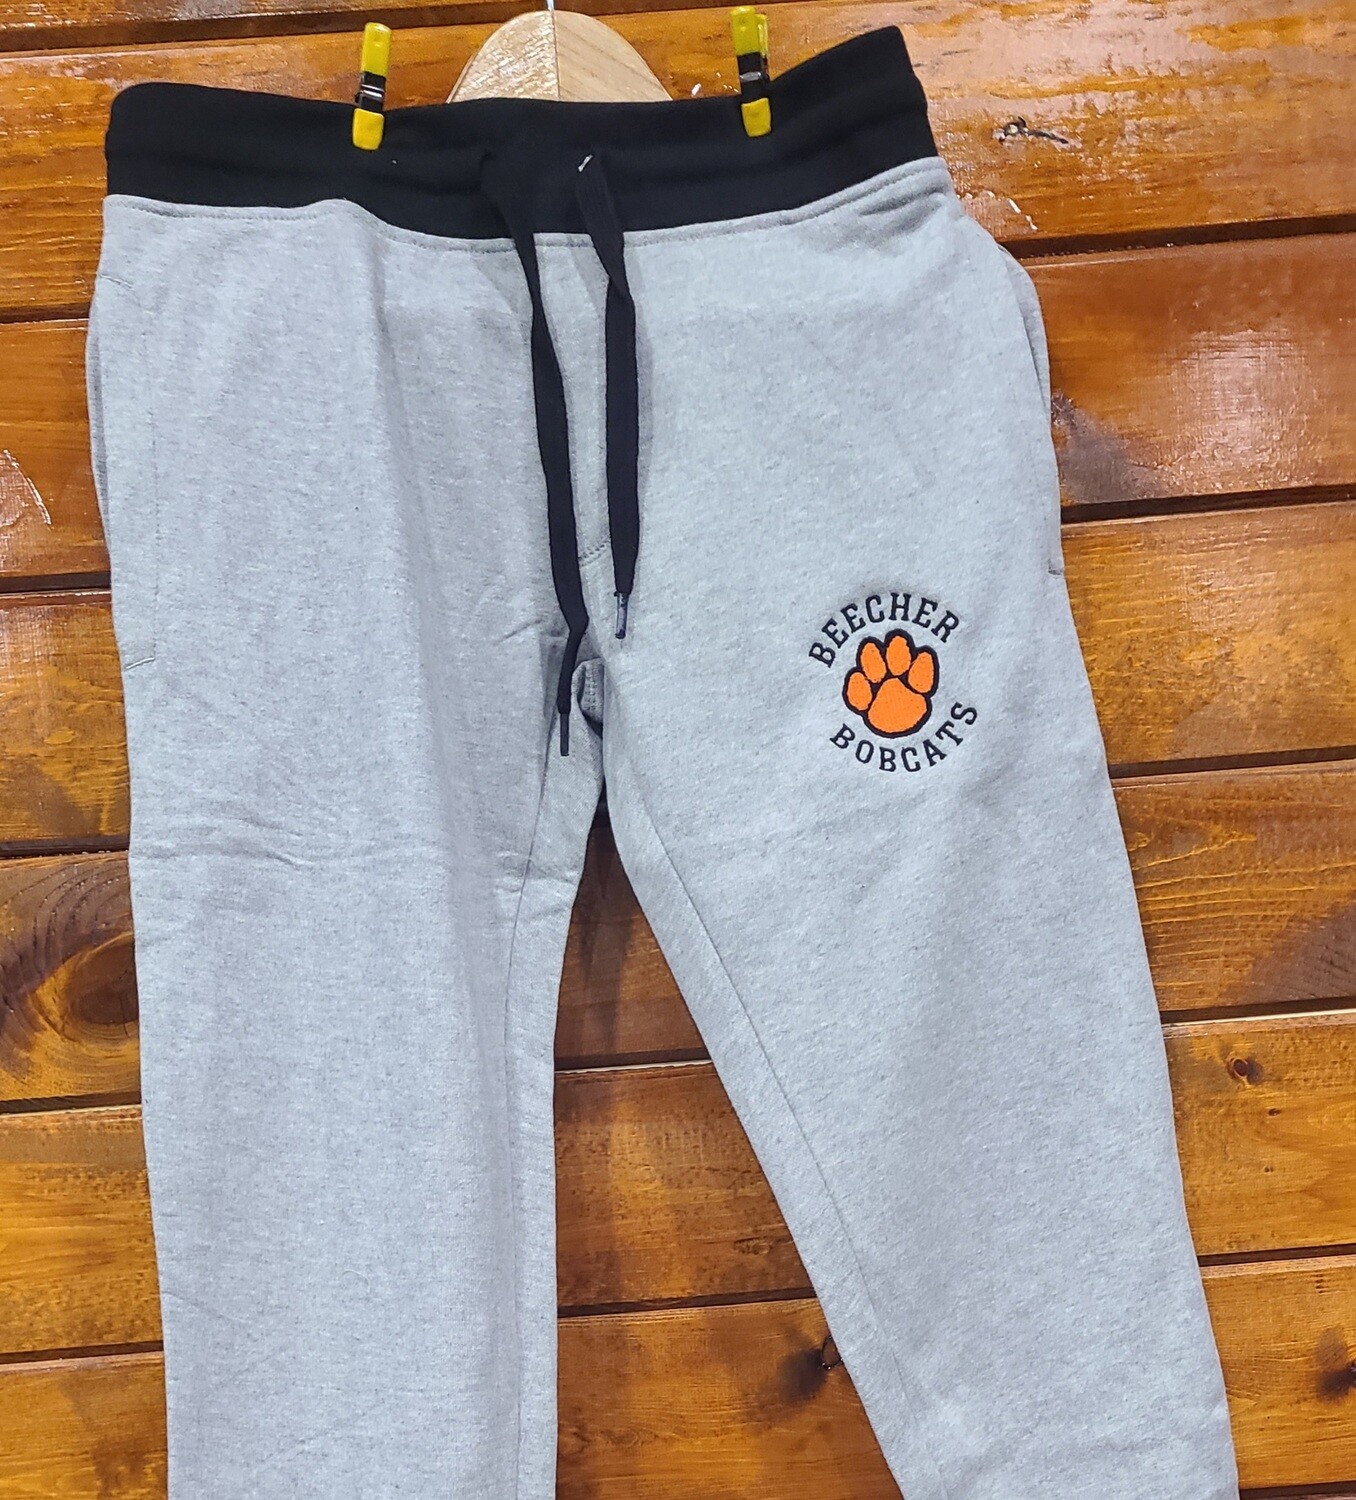 Embroidered Beecher Bobcats Paw Sweatpants $12 CLOSEOUT